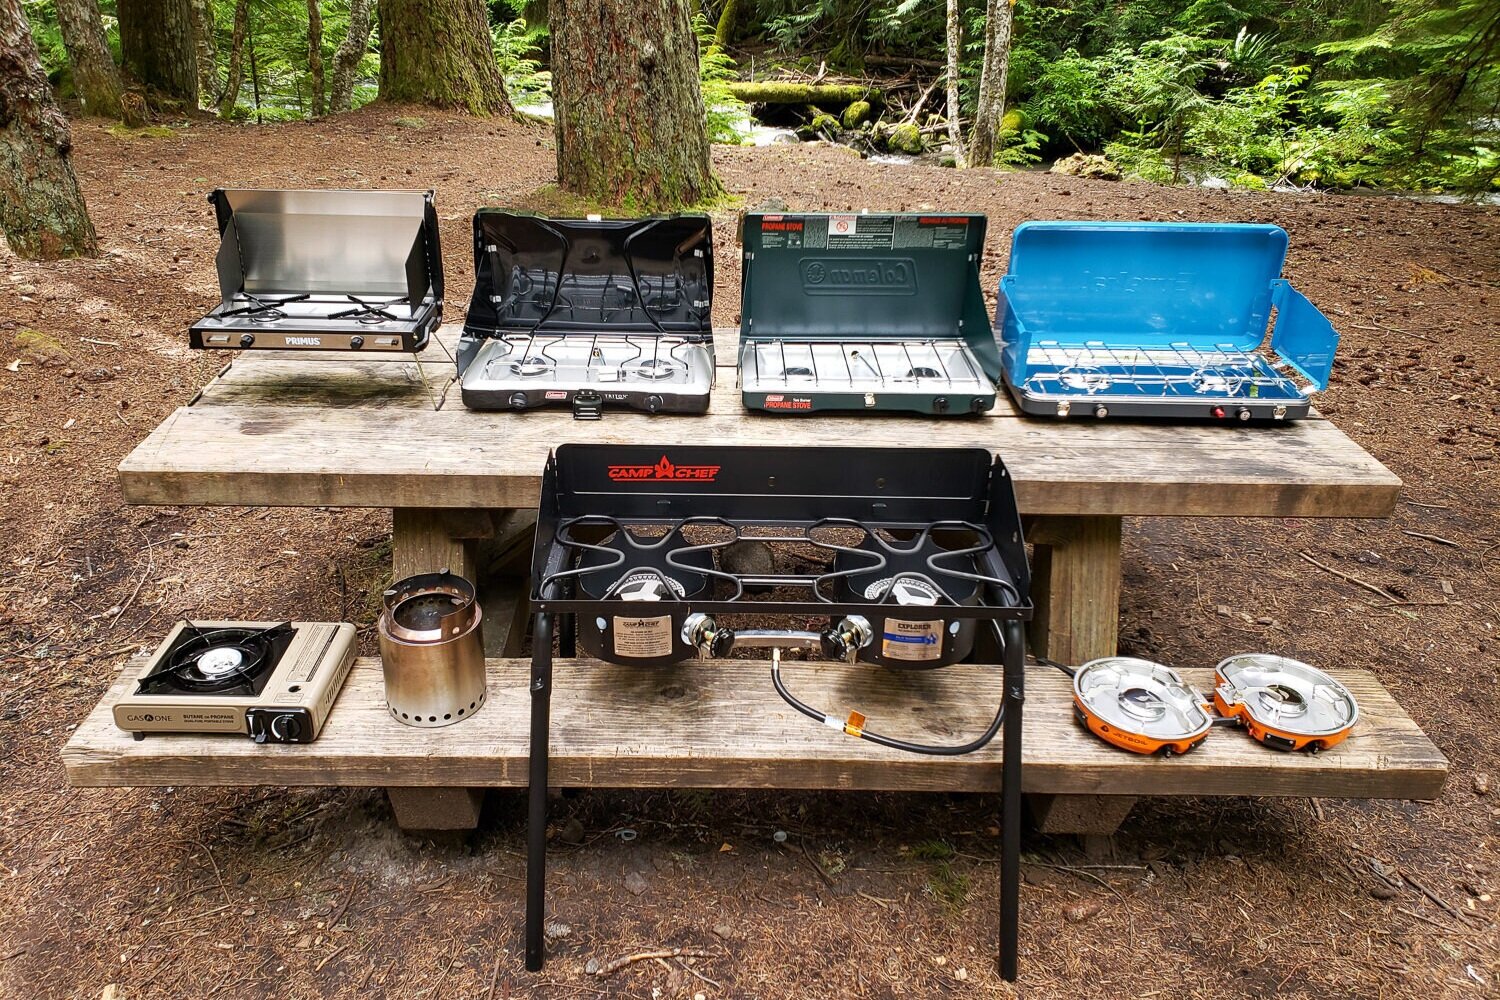 Comparing the size and cooking area dimensions of the best camping stoves on the market